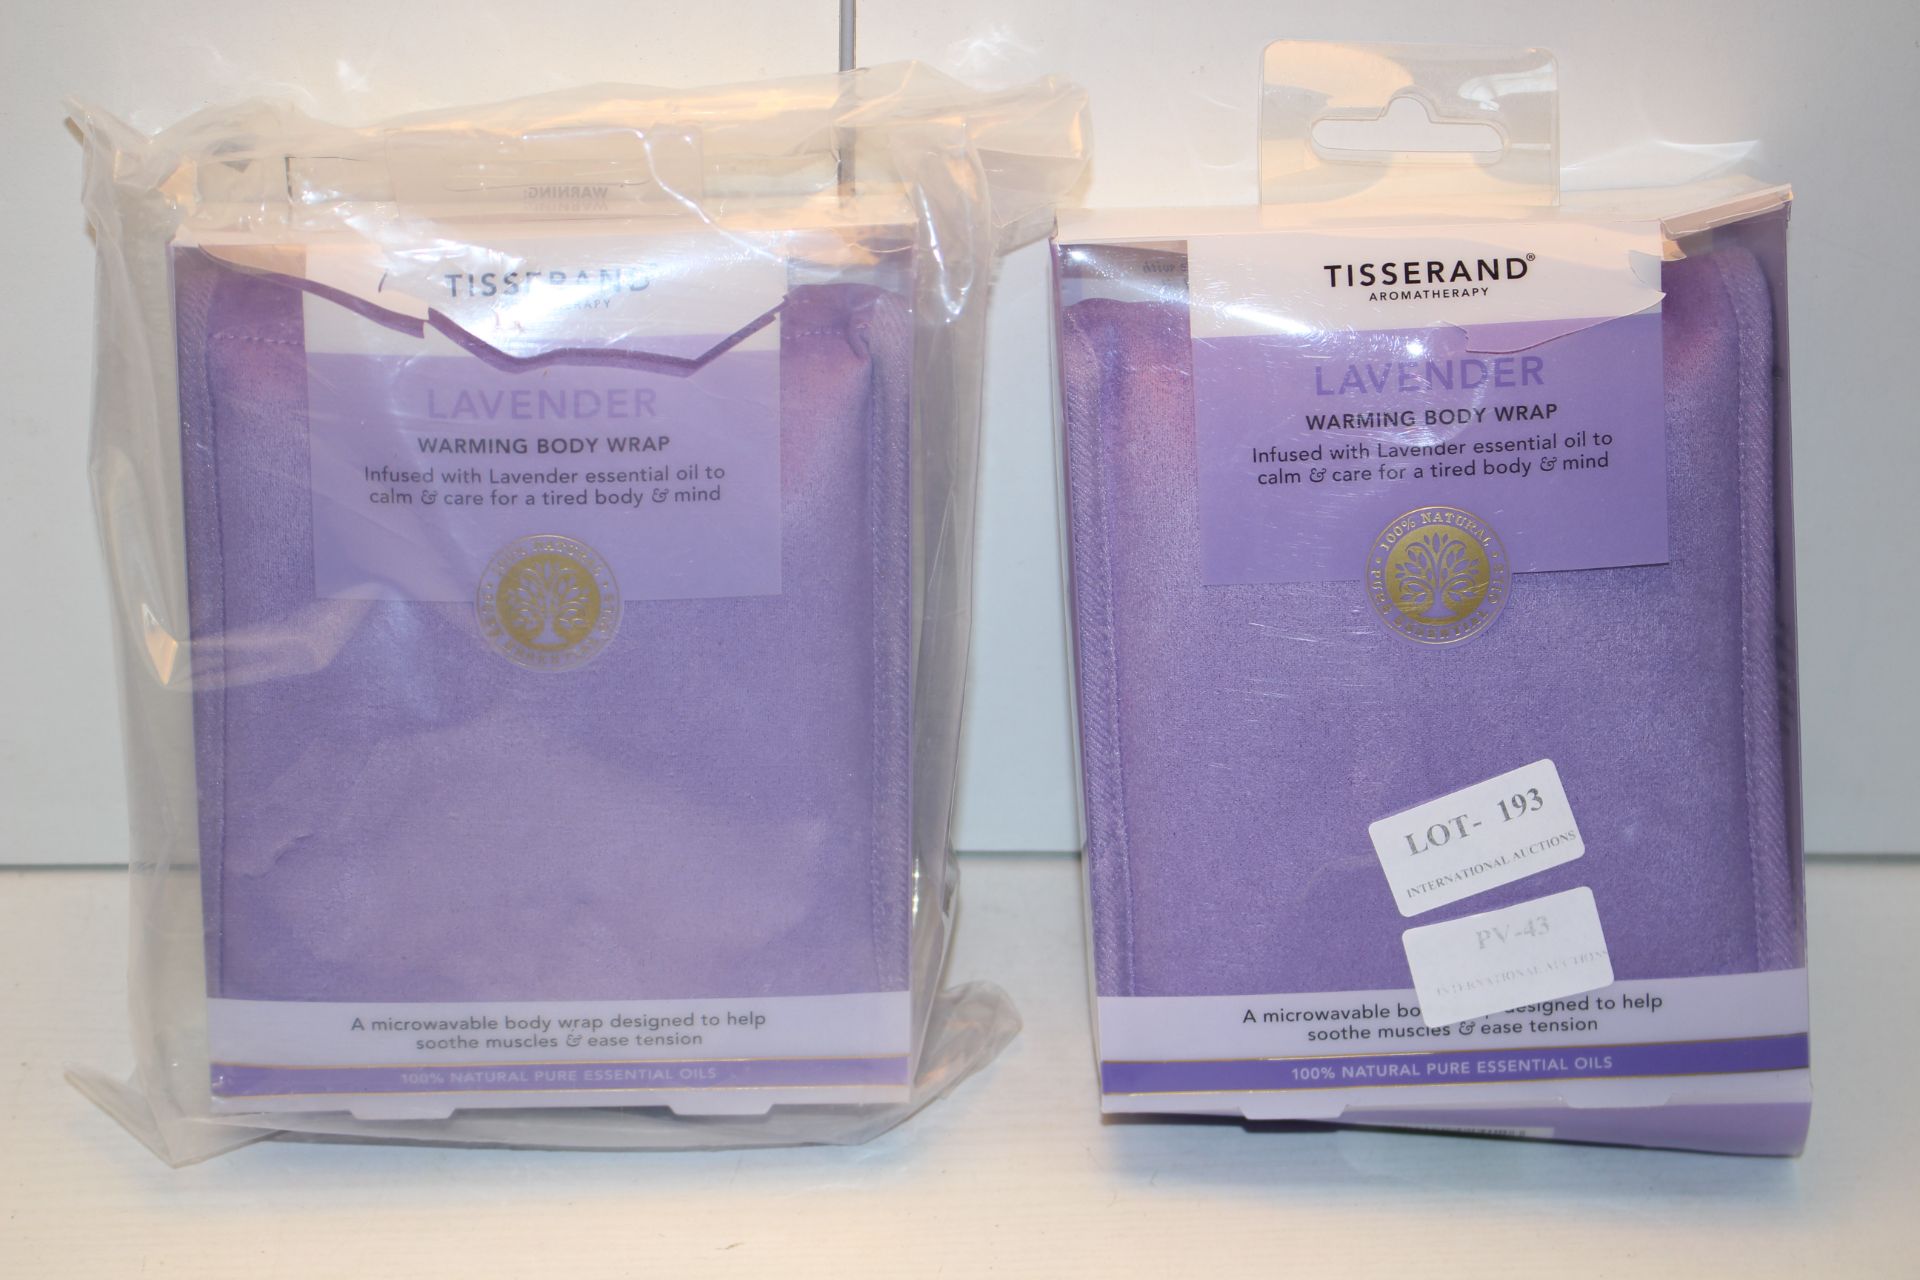 2X TISSERAND LAVENDAR WARMING BODY WRAPS Condition ReportAppraisal Available on Request- All Items